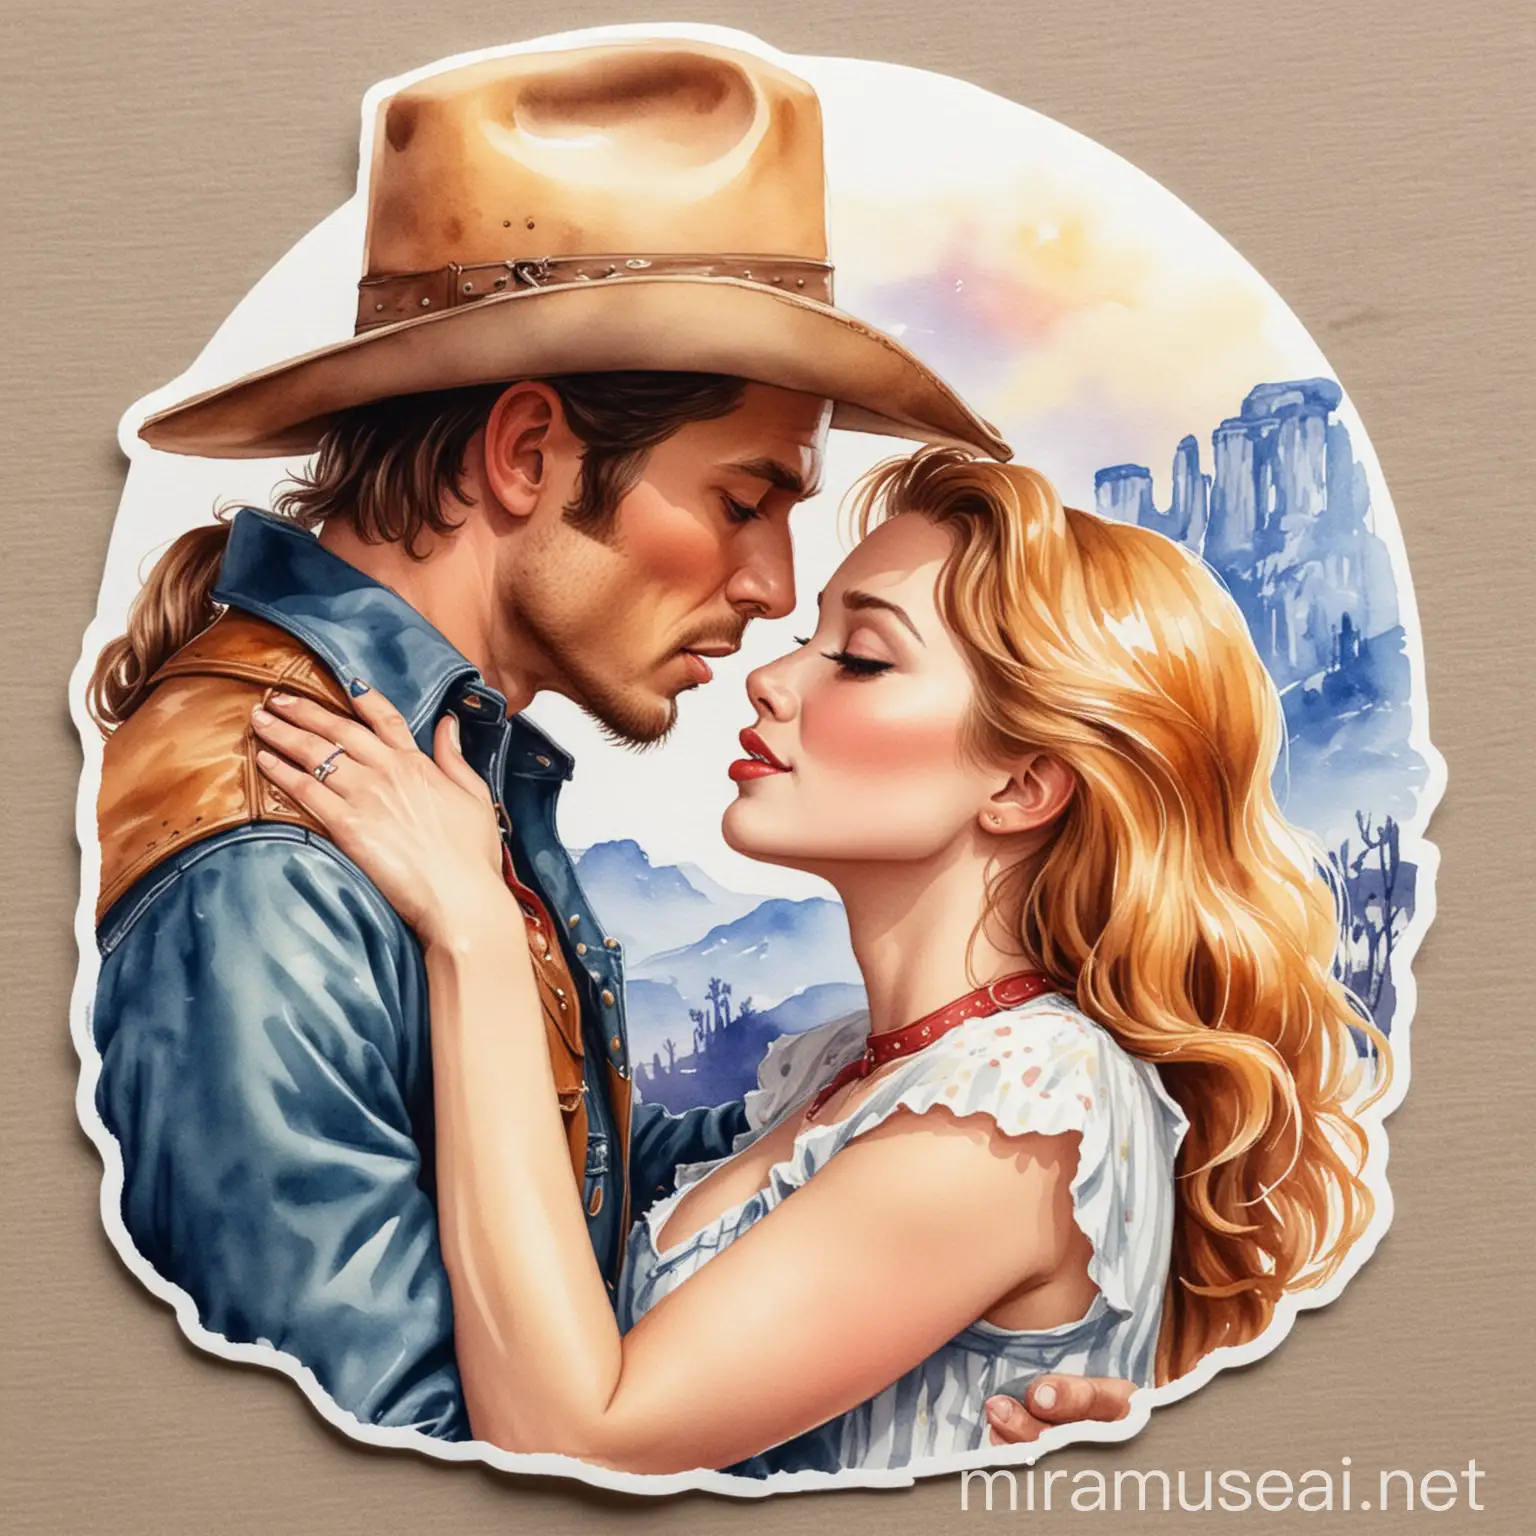 Romantic Cowboy and Girl Kissing Classic Hollywood Watercolor Illustration Sticker